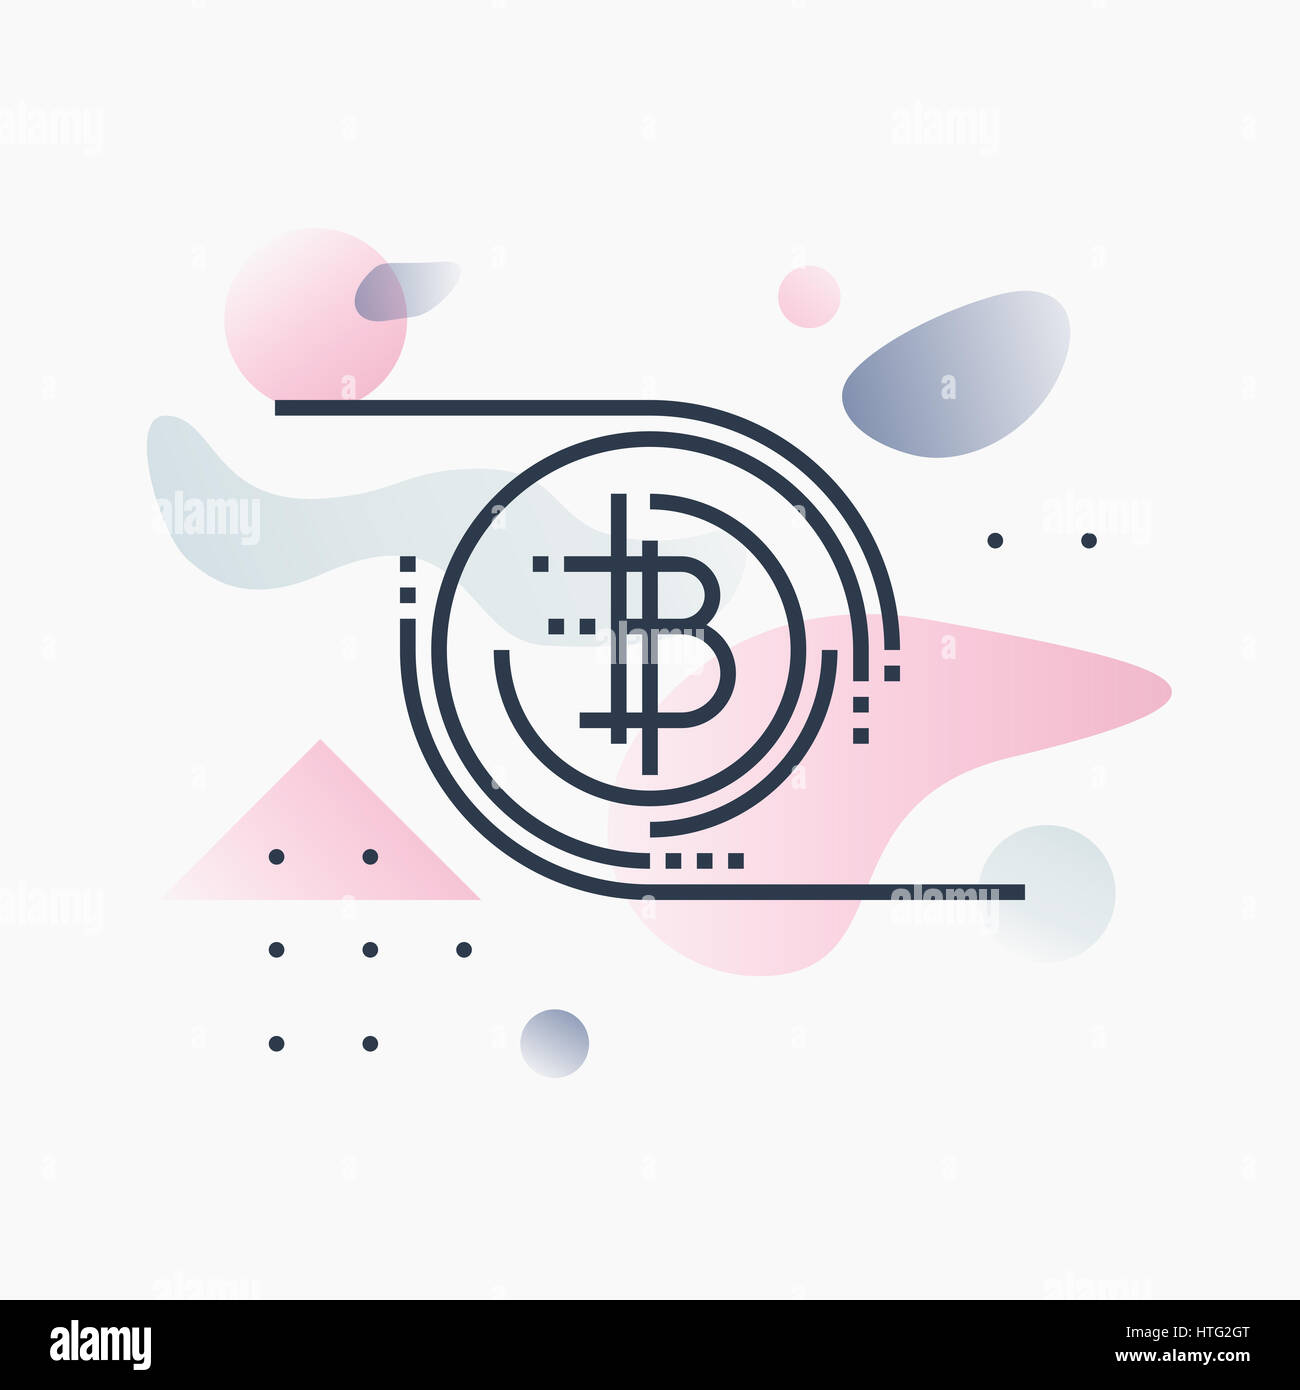 La technologie virtuelle Bitcoin, cryptocurrency services. Abstract illustration concept. Banque D'Images